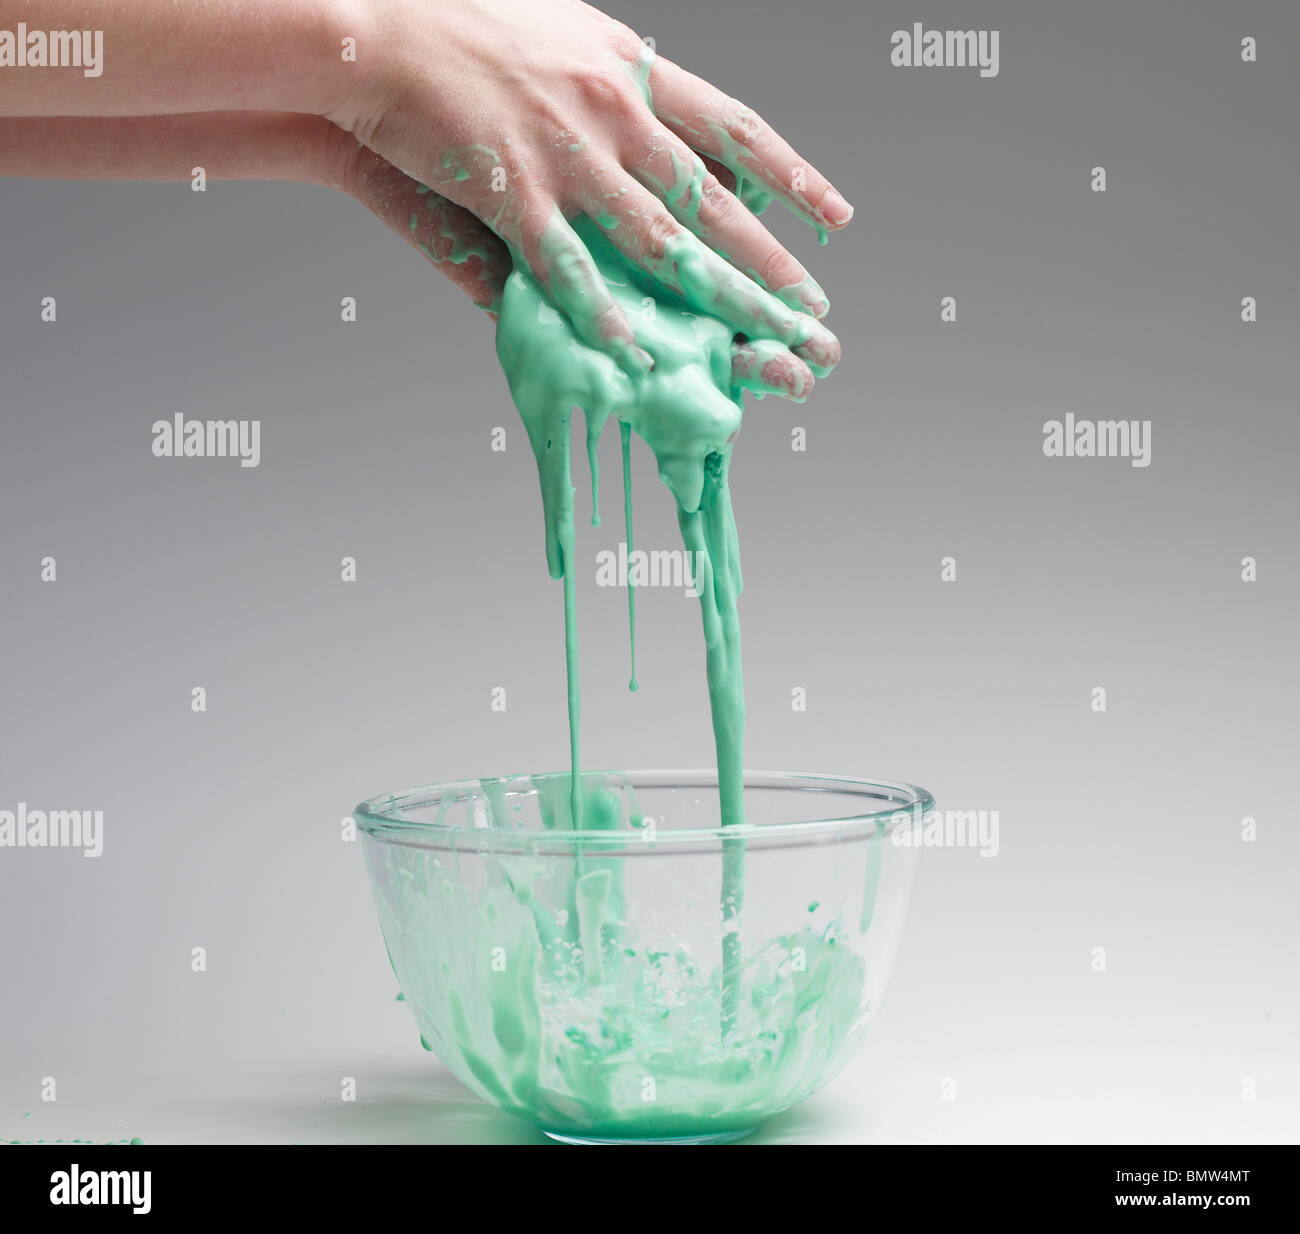 Green slime running off hands into a bowl Stock Photo